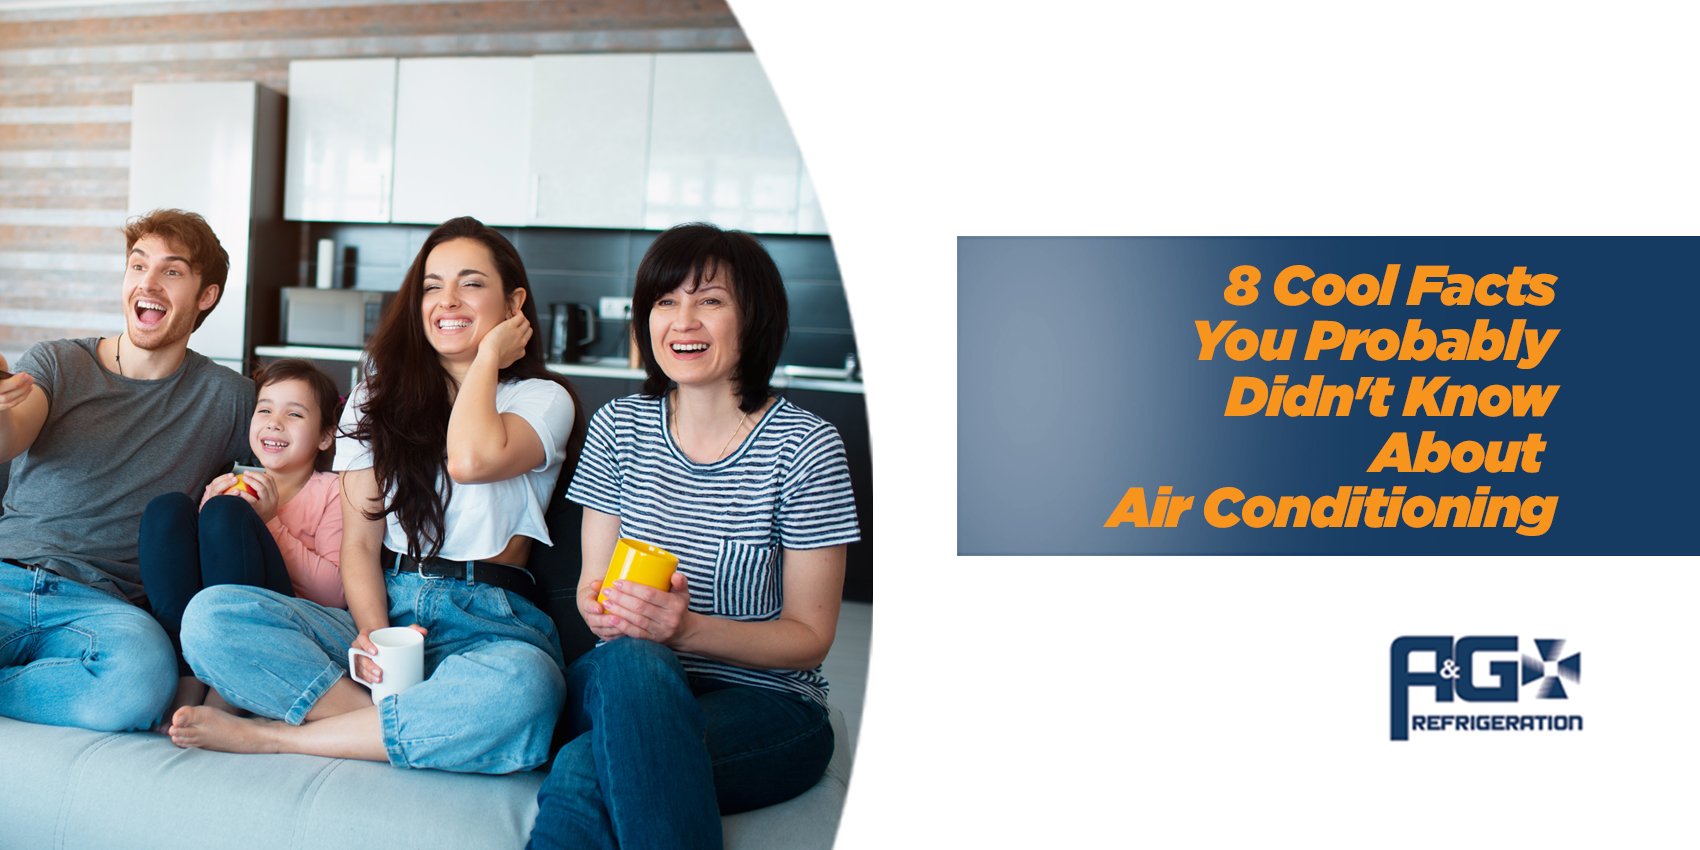 8 Cool Facts You Probably Didn't Know About Air Conditioning